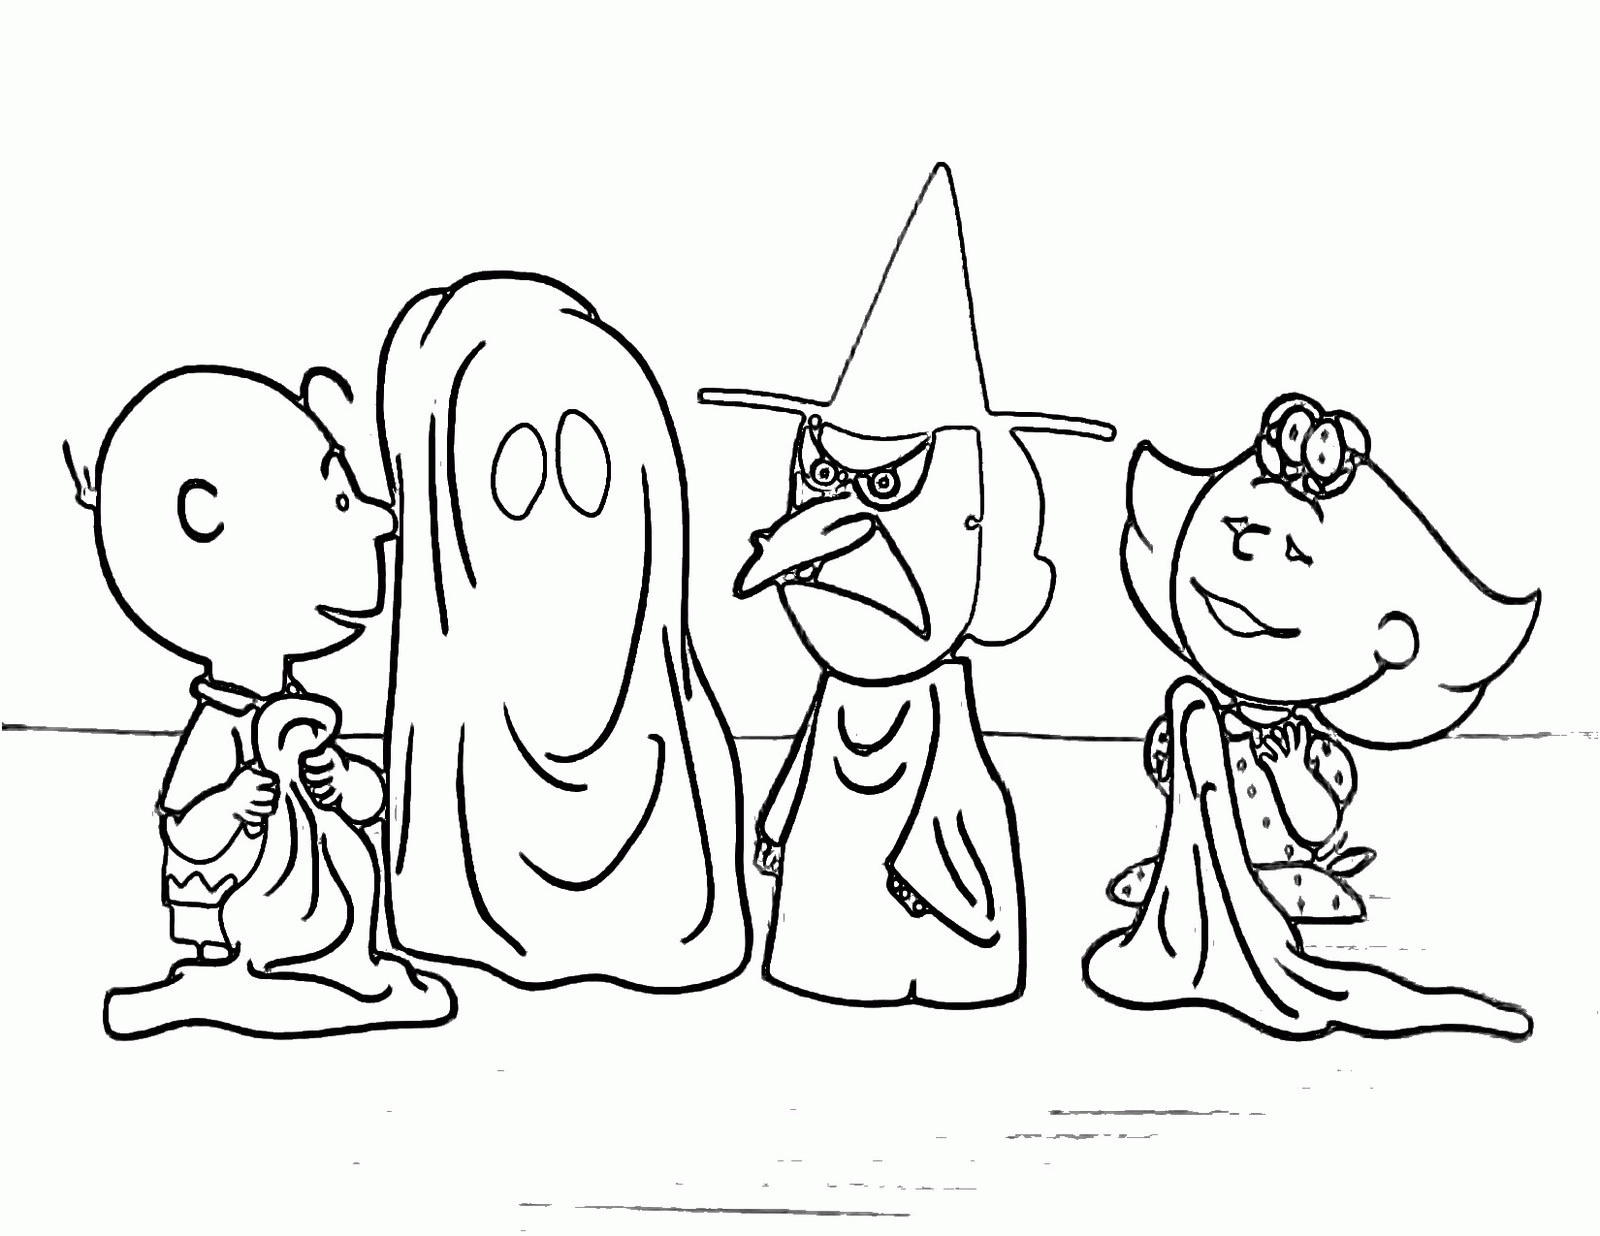 Print Charlie Brown Halloween Coloring Pages or Download Charlie ...